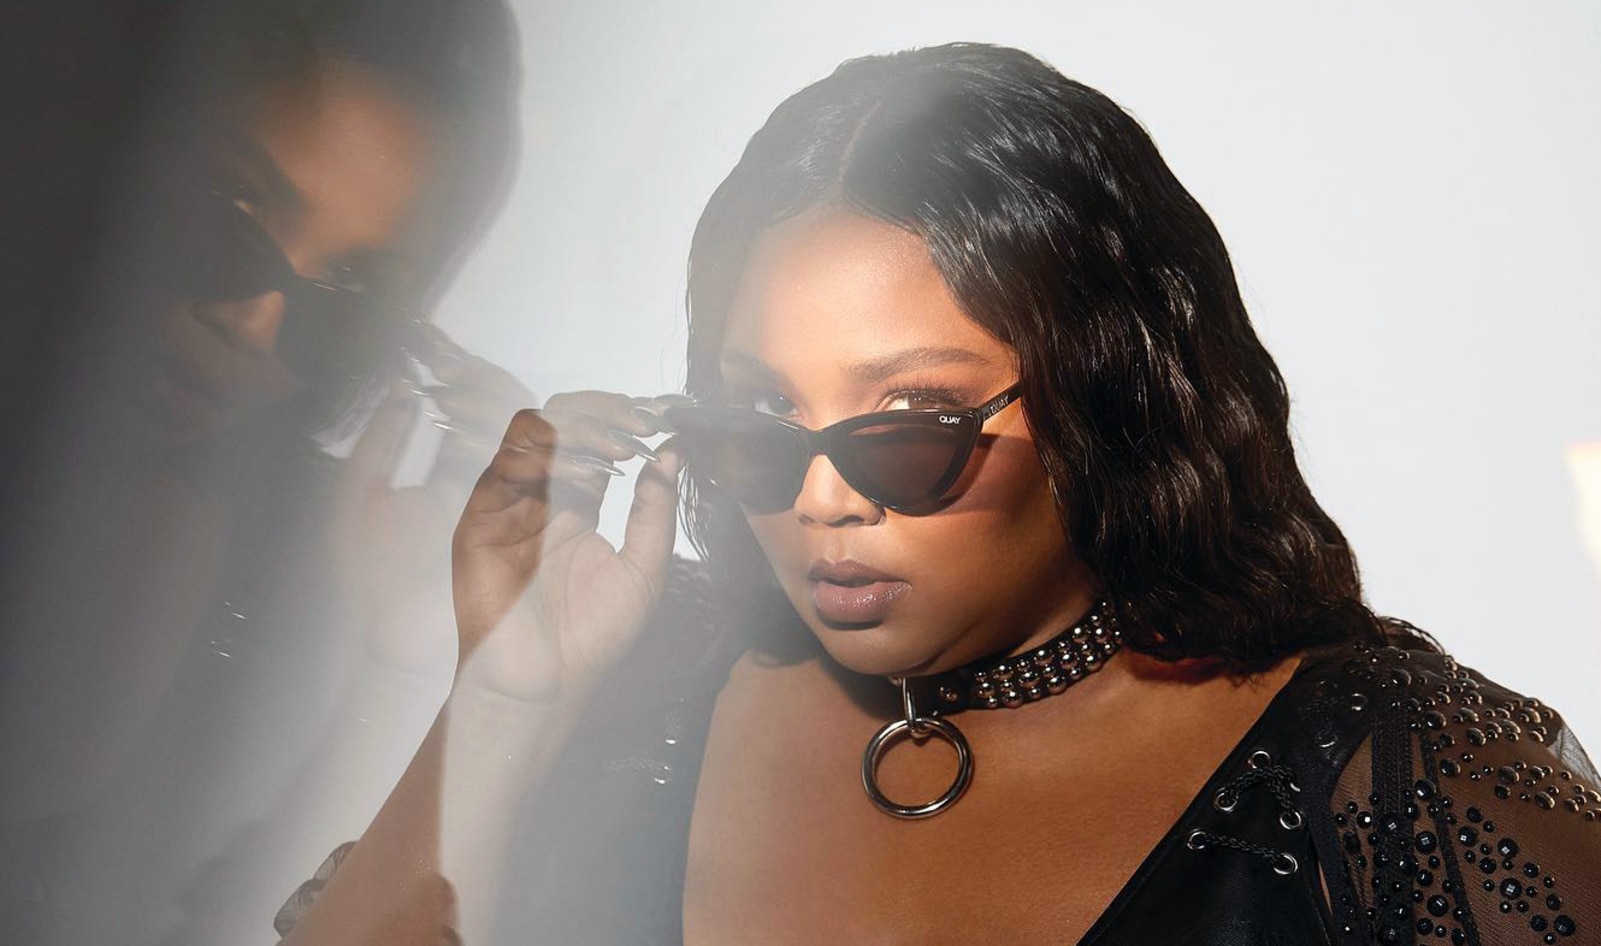 Lizzo Celebrates Six-Month Vegan Anniversary with a Message: “Love Yourself at Every Stage”